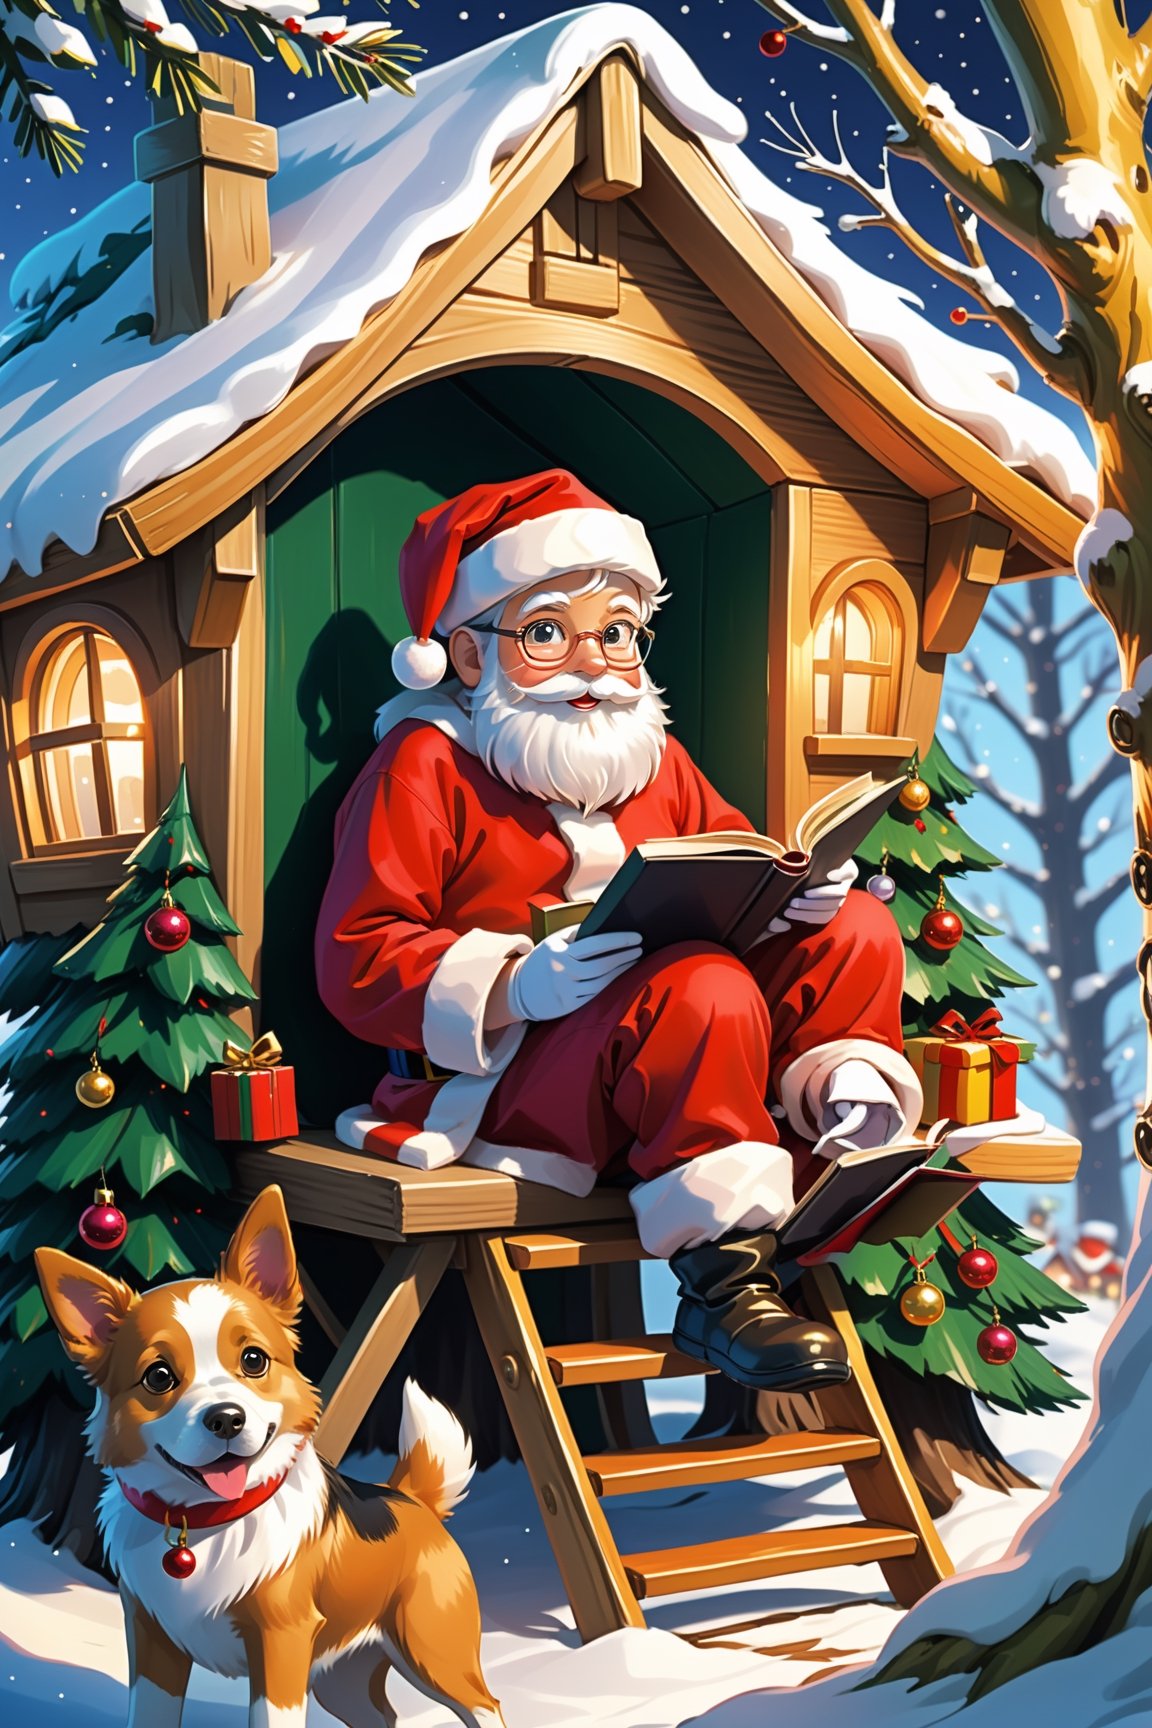 ((Anime)), Santa Claus reading a book in a tree house, dog in the far back, Christmas tree, more detail XL, SFW, solo, closeup shot,